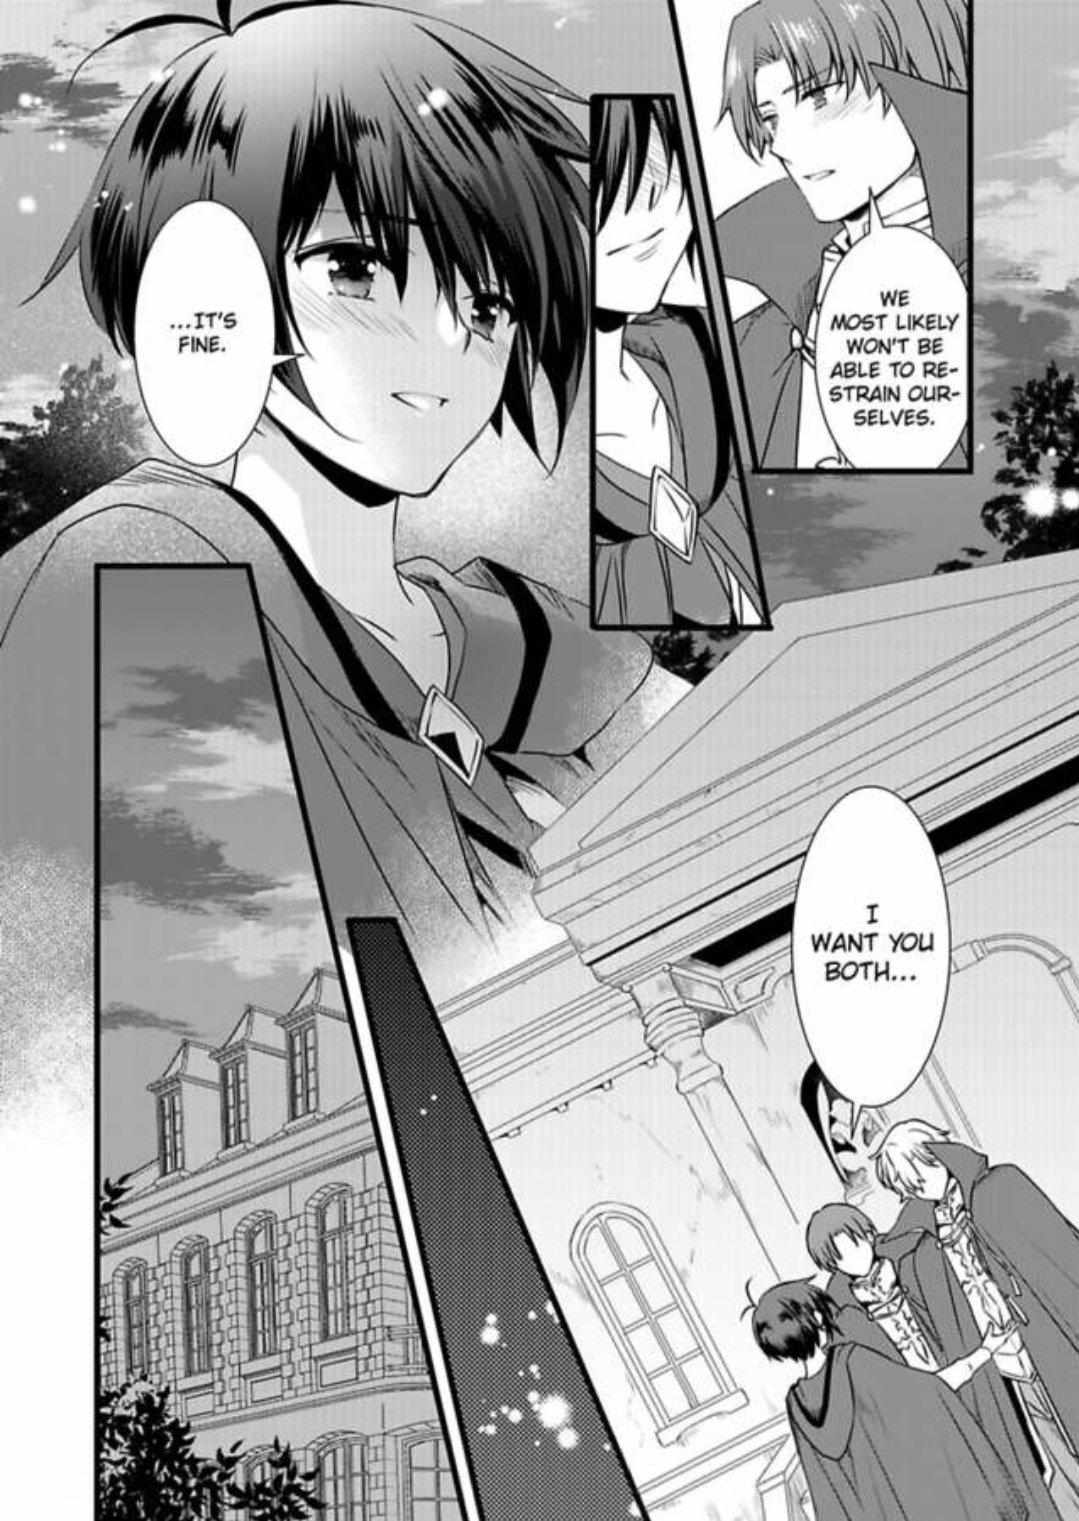 I Turned into a Girl and Turned on All the Knights! -I Need to Have Sex to Turn Back!- - chapter 18 - #4